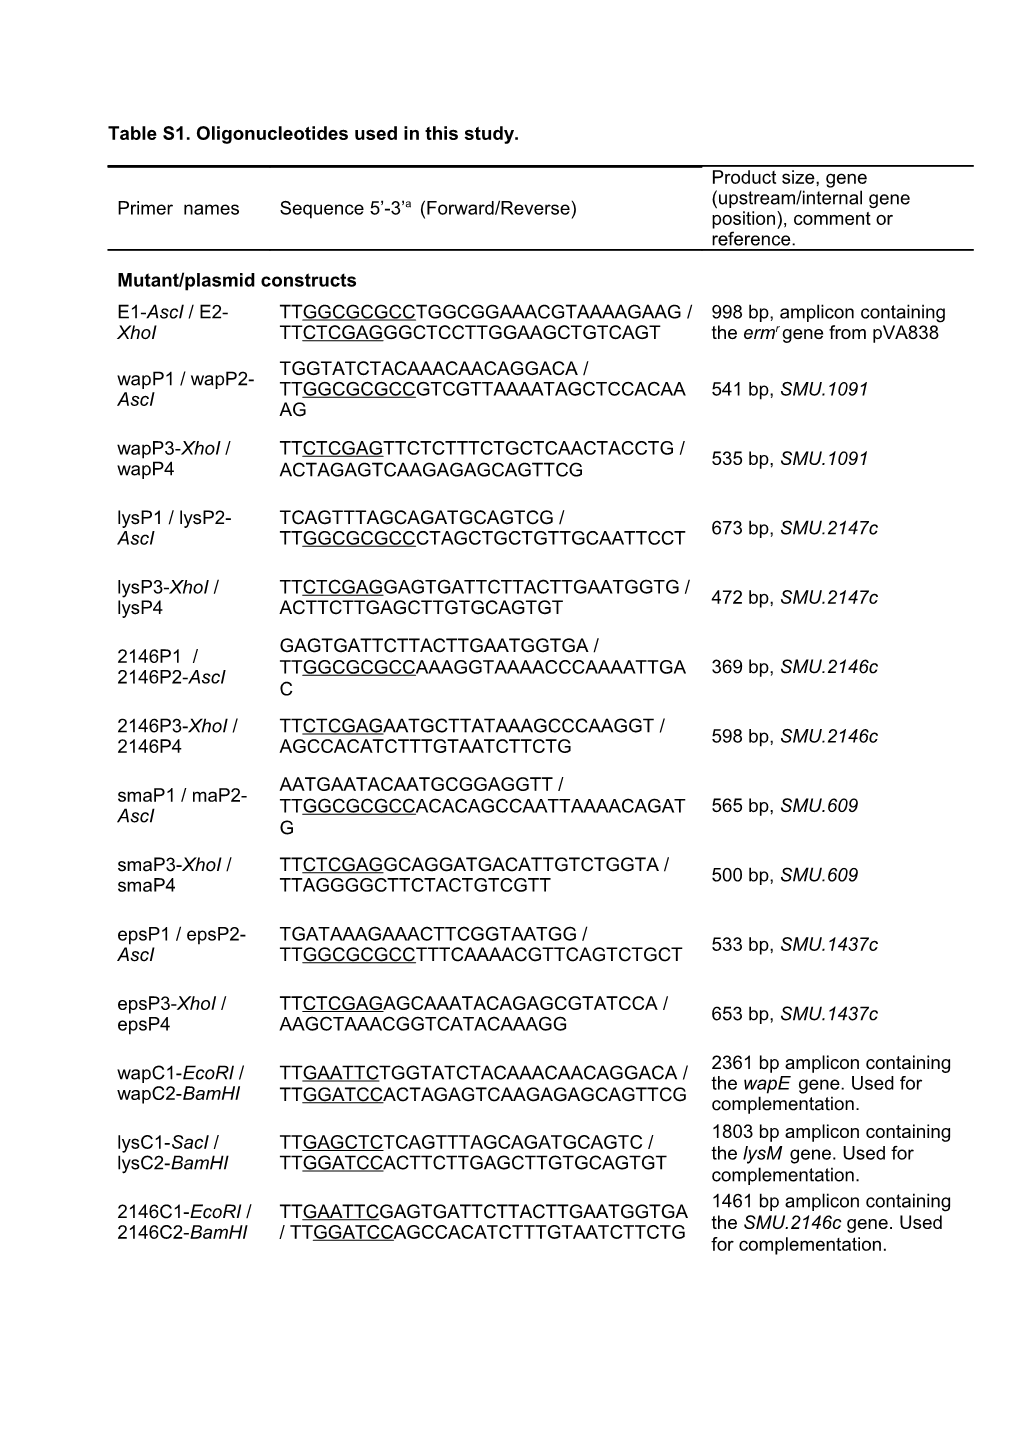 Table S1. Oligonucleotides Used in This Study